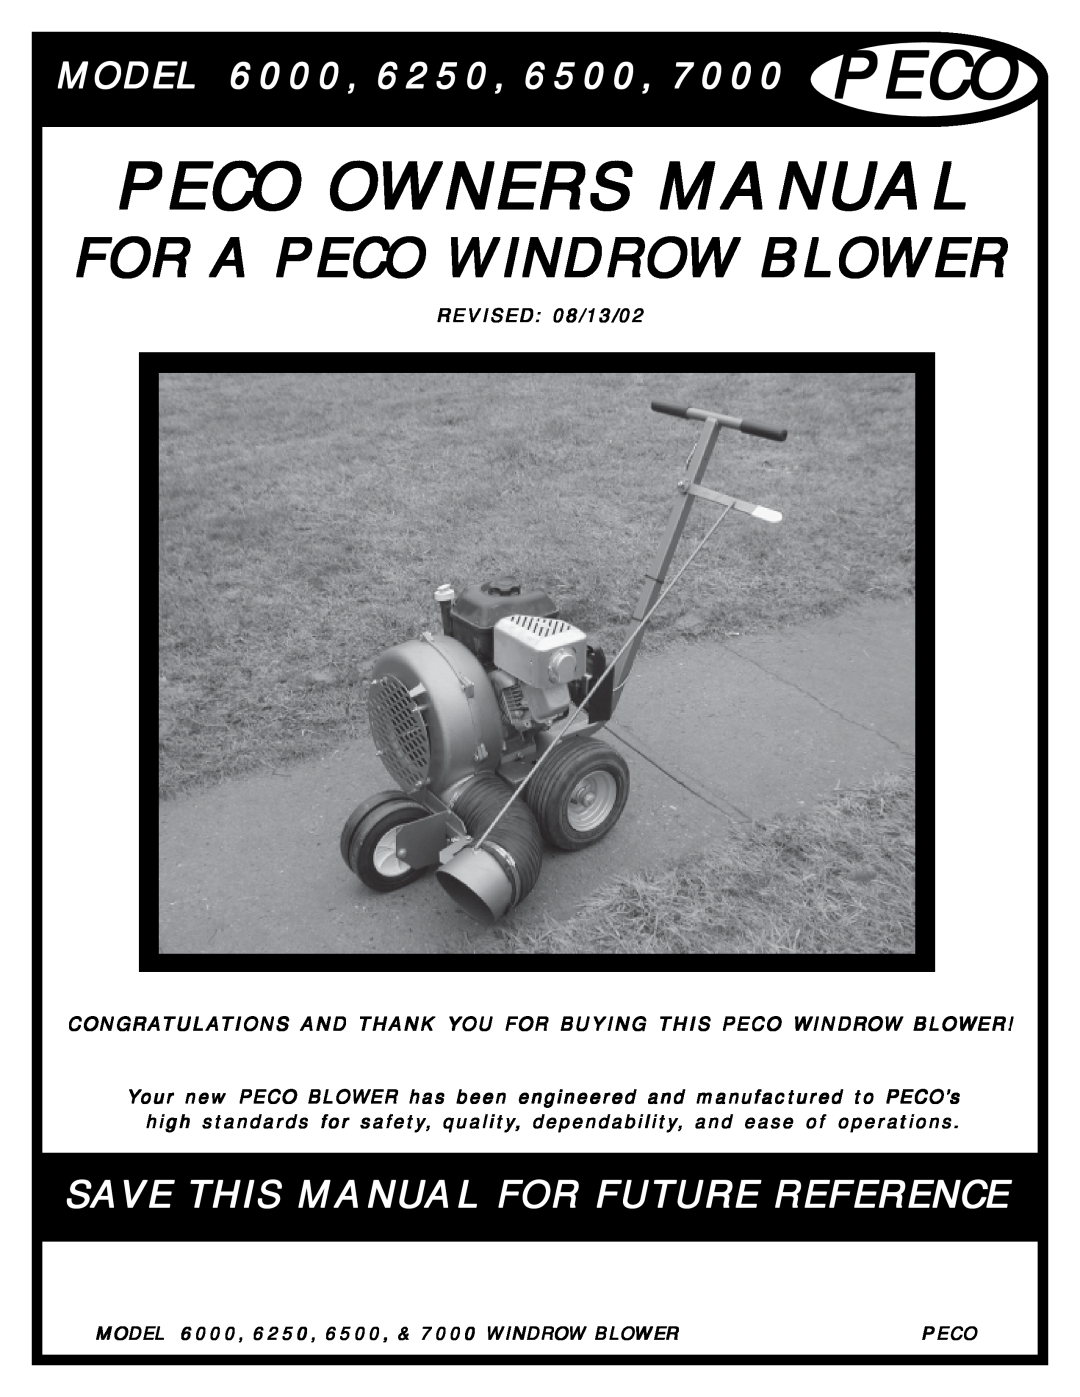 Pecoware manual For A Peco Windrow Blower, Save This Manual For Future Reference, MODEL 6000, 6250, 6500, 7000 PECO 